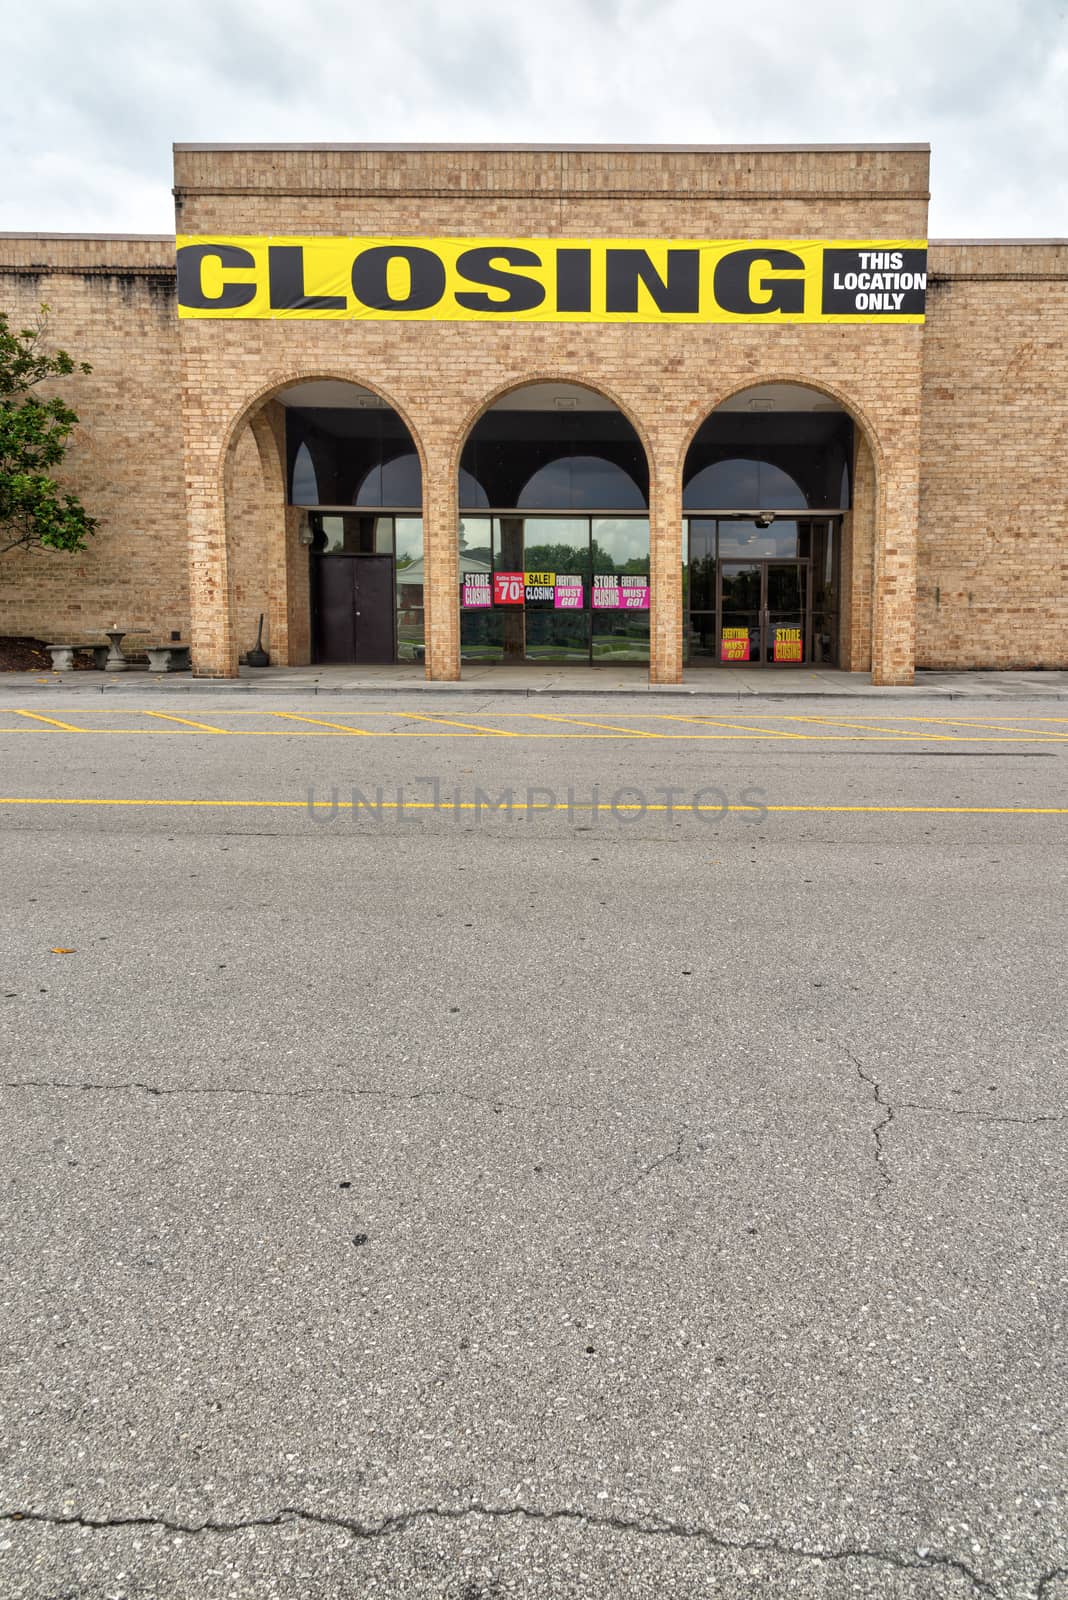 Retail Store Going Out of Business During Pandemic by stockbuster1